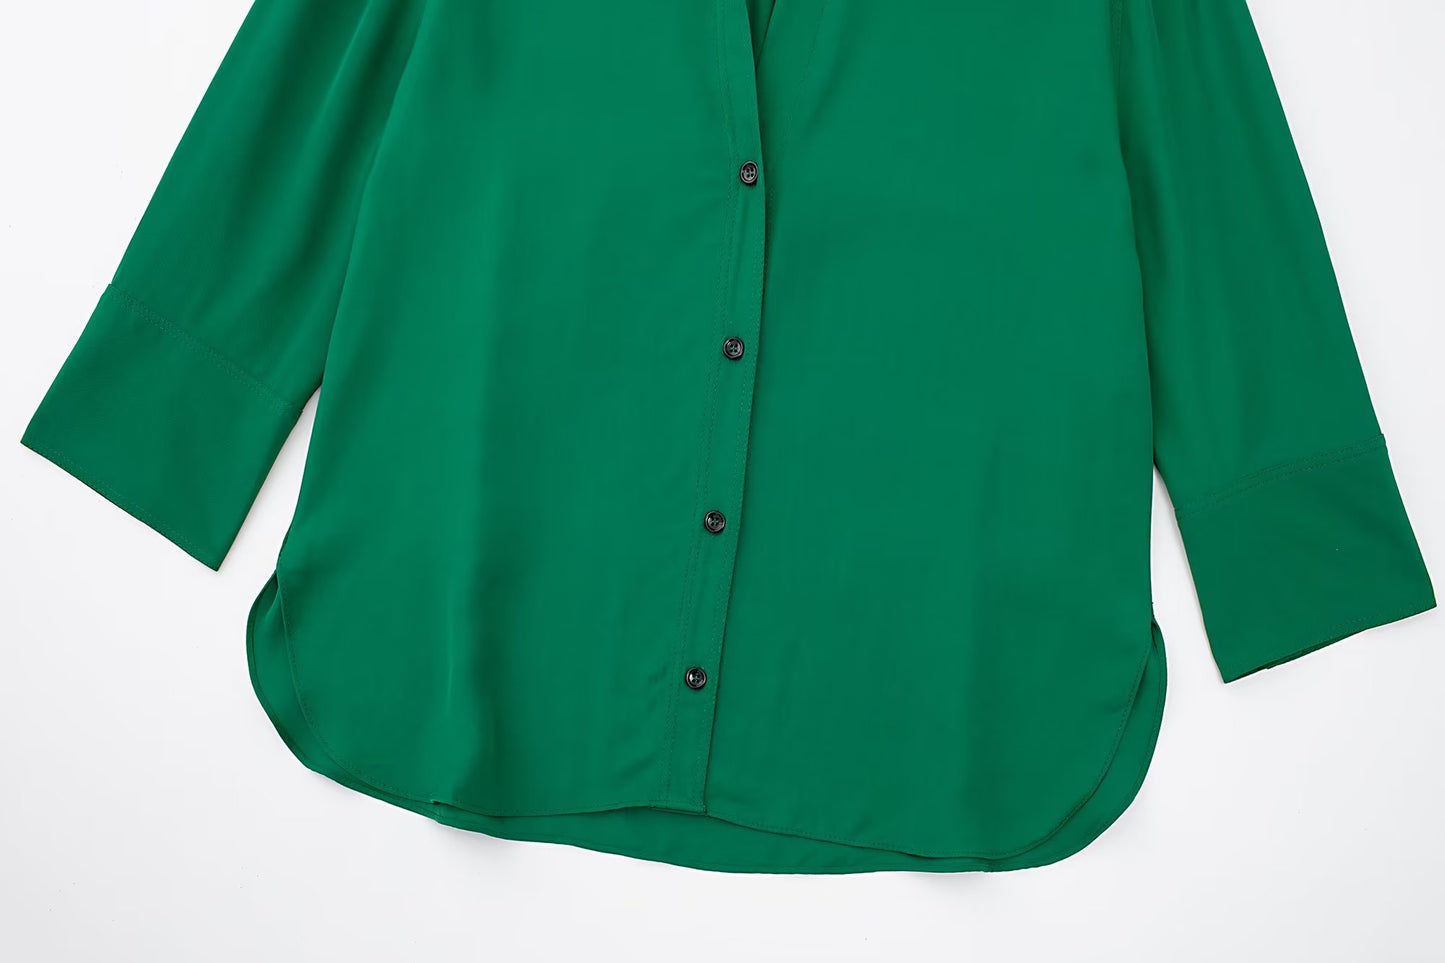 Autumn Retro Collared Long Sleeve Single Breasted Green Loose Shirt Women